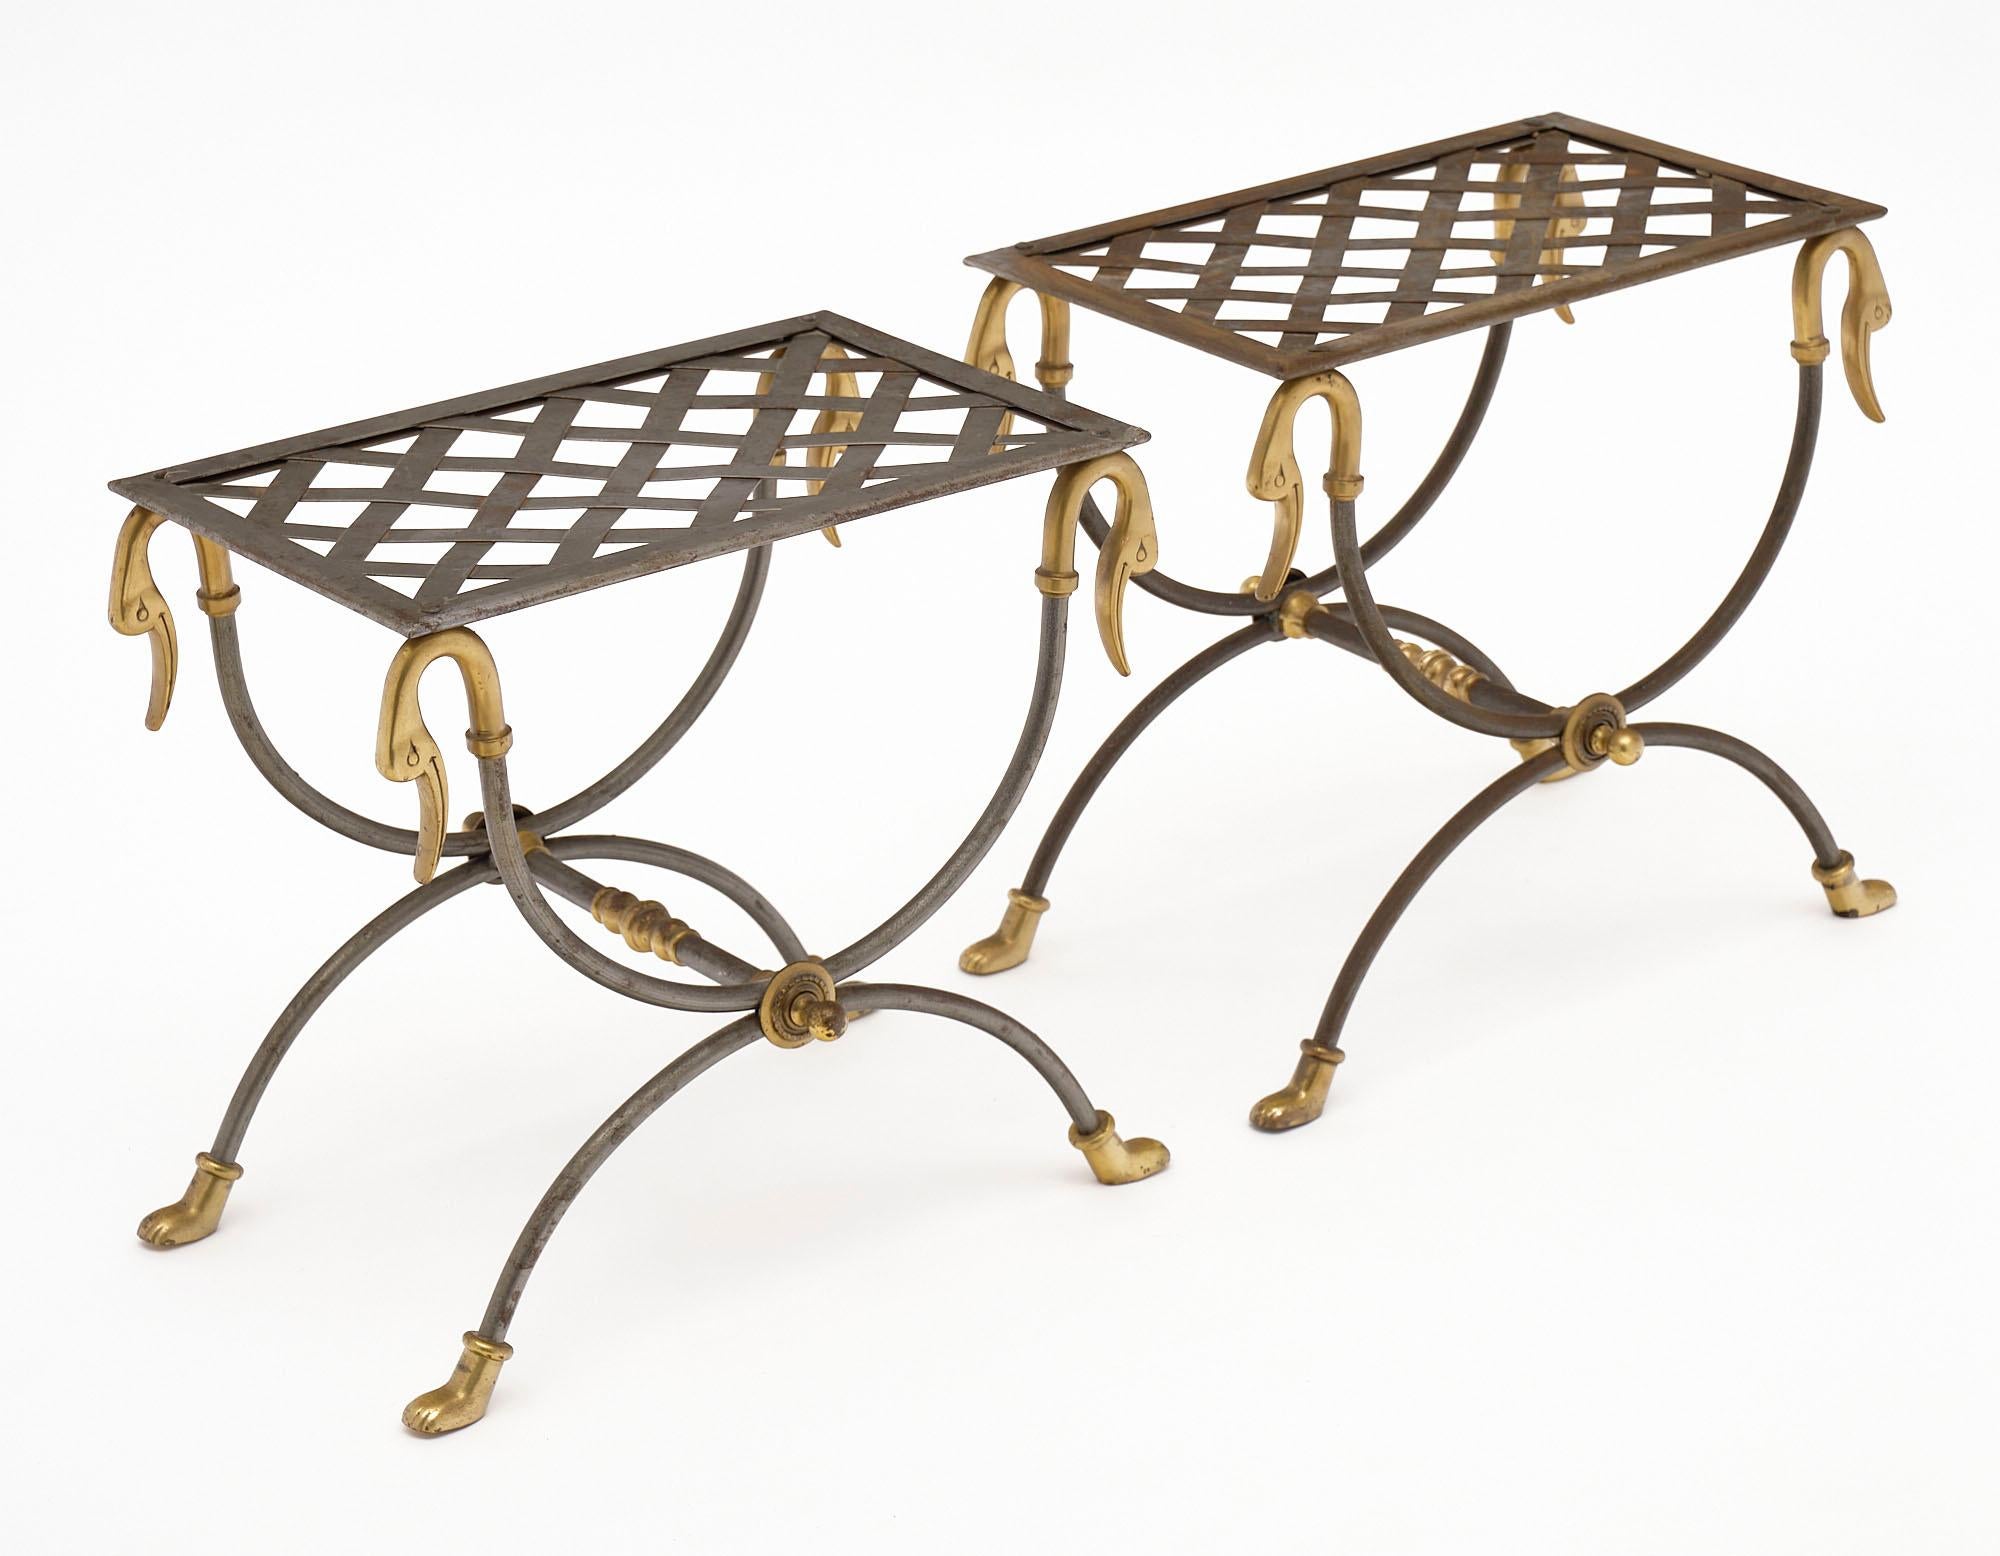 Pair of French “curule” stools made of steel and featuring solid bronze ornamentation.